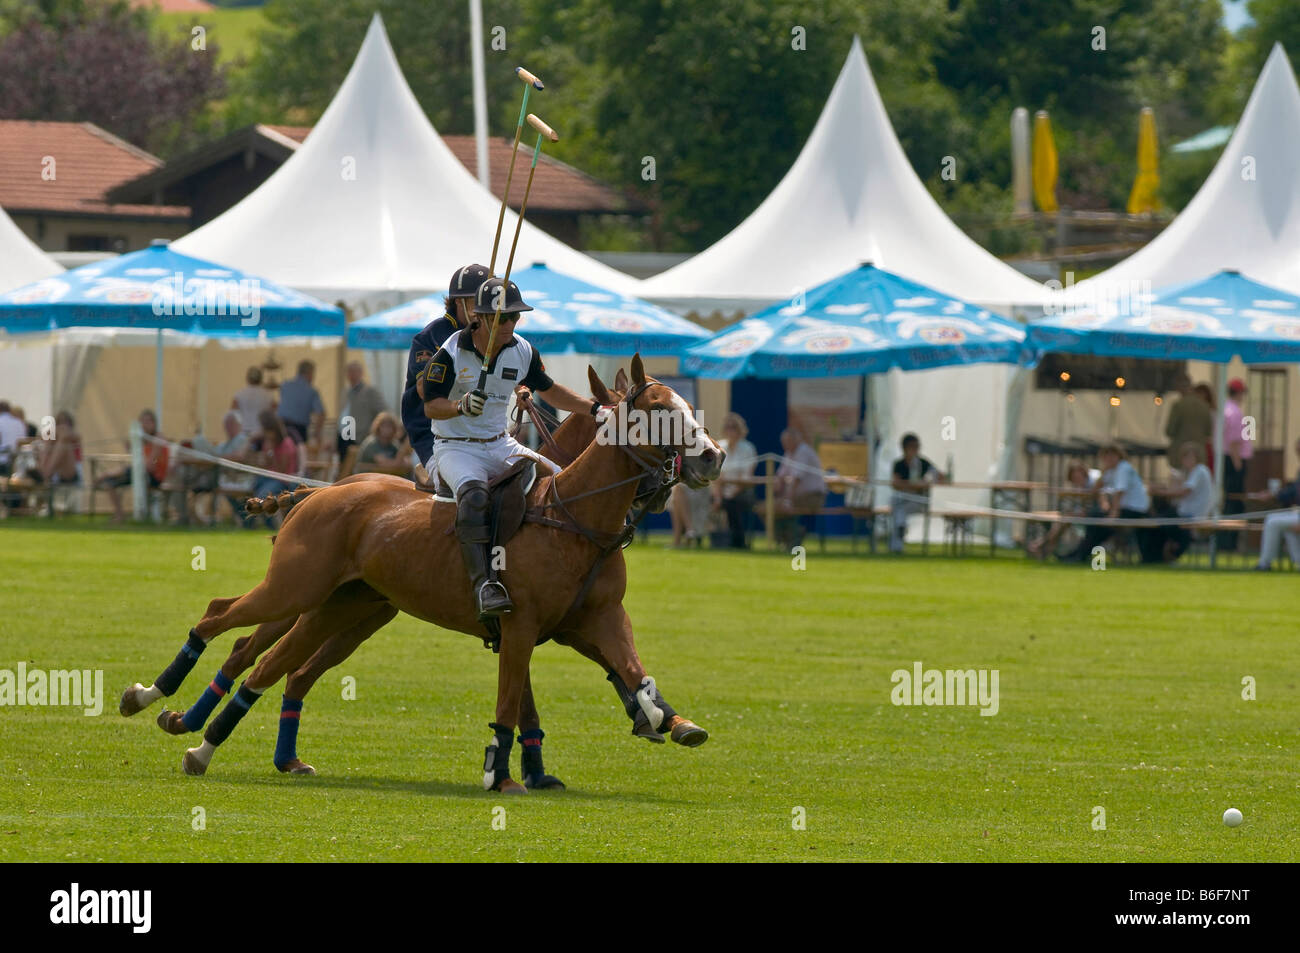 Two polo players jostling for the ball at the Berenberg High Goal Trophy 2008 polo tournament in Thann, Holzkirchen, Bavaria, G Stock Photo